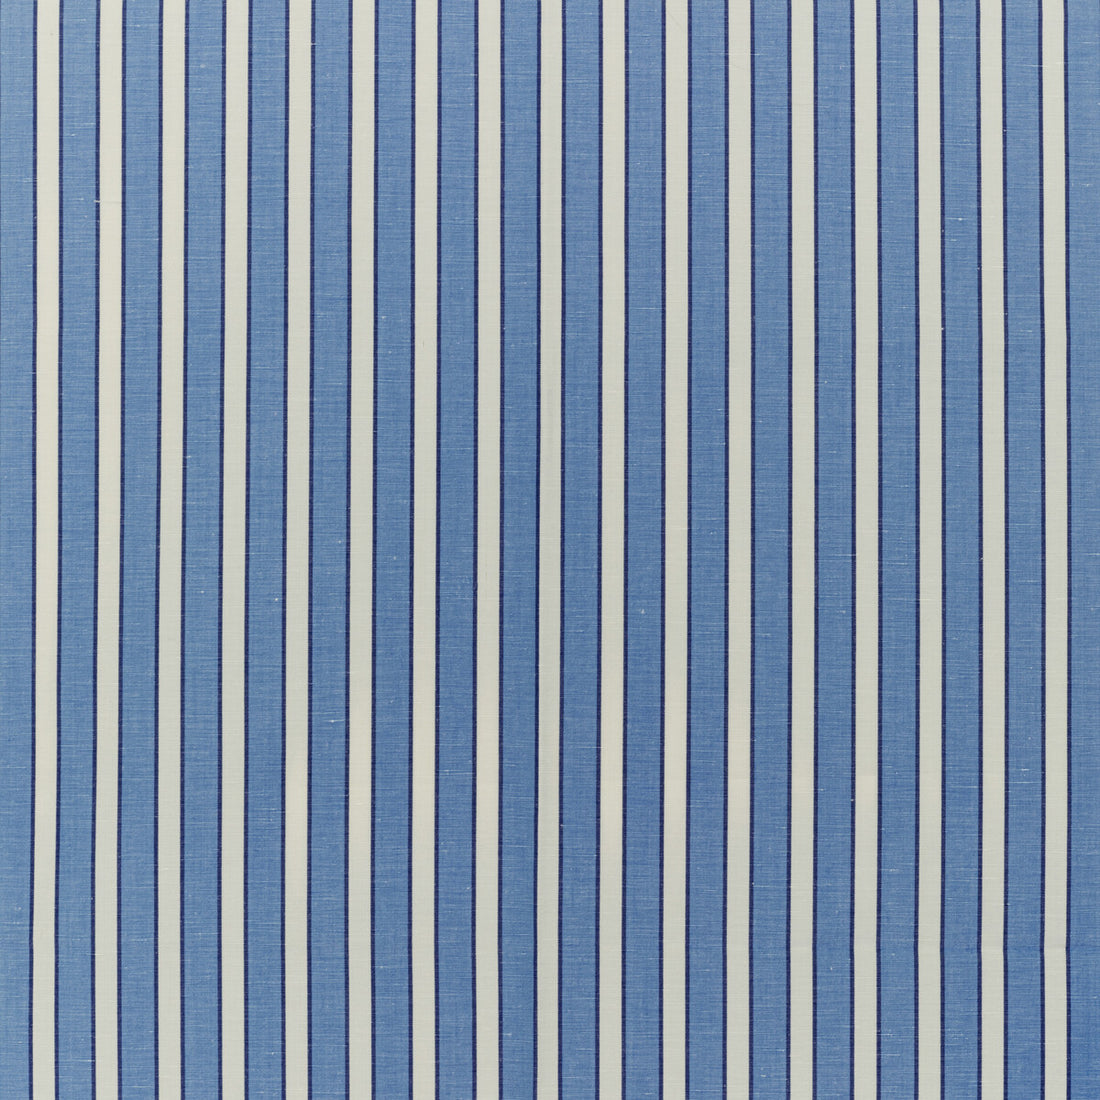 Rouen Stripe fabric in blue color - pattern 8022117.155.0 - by Brunschwig &amp; Fils in the Normant Checks And Stripes II collection